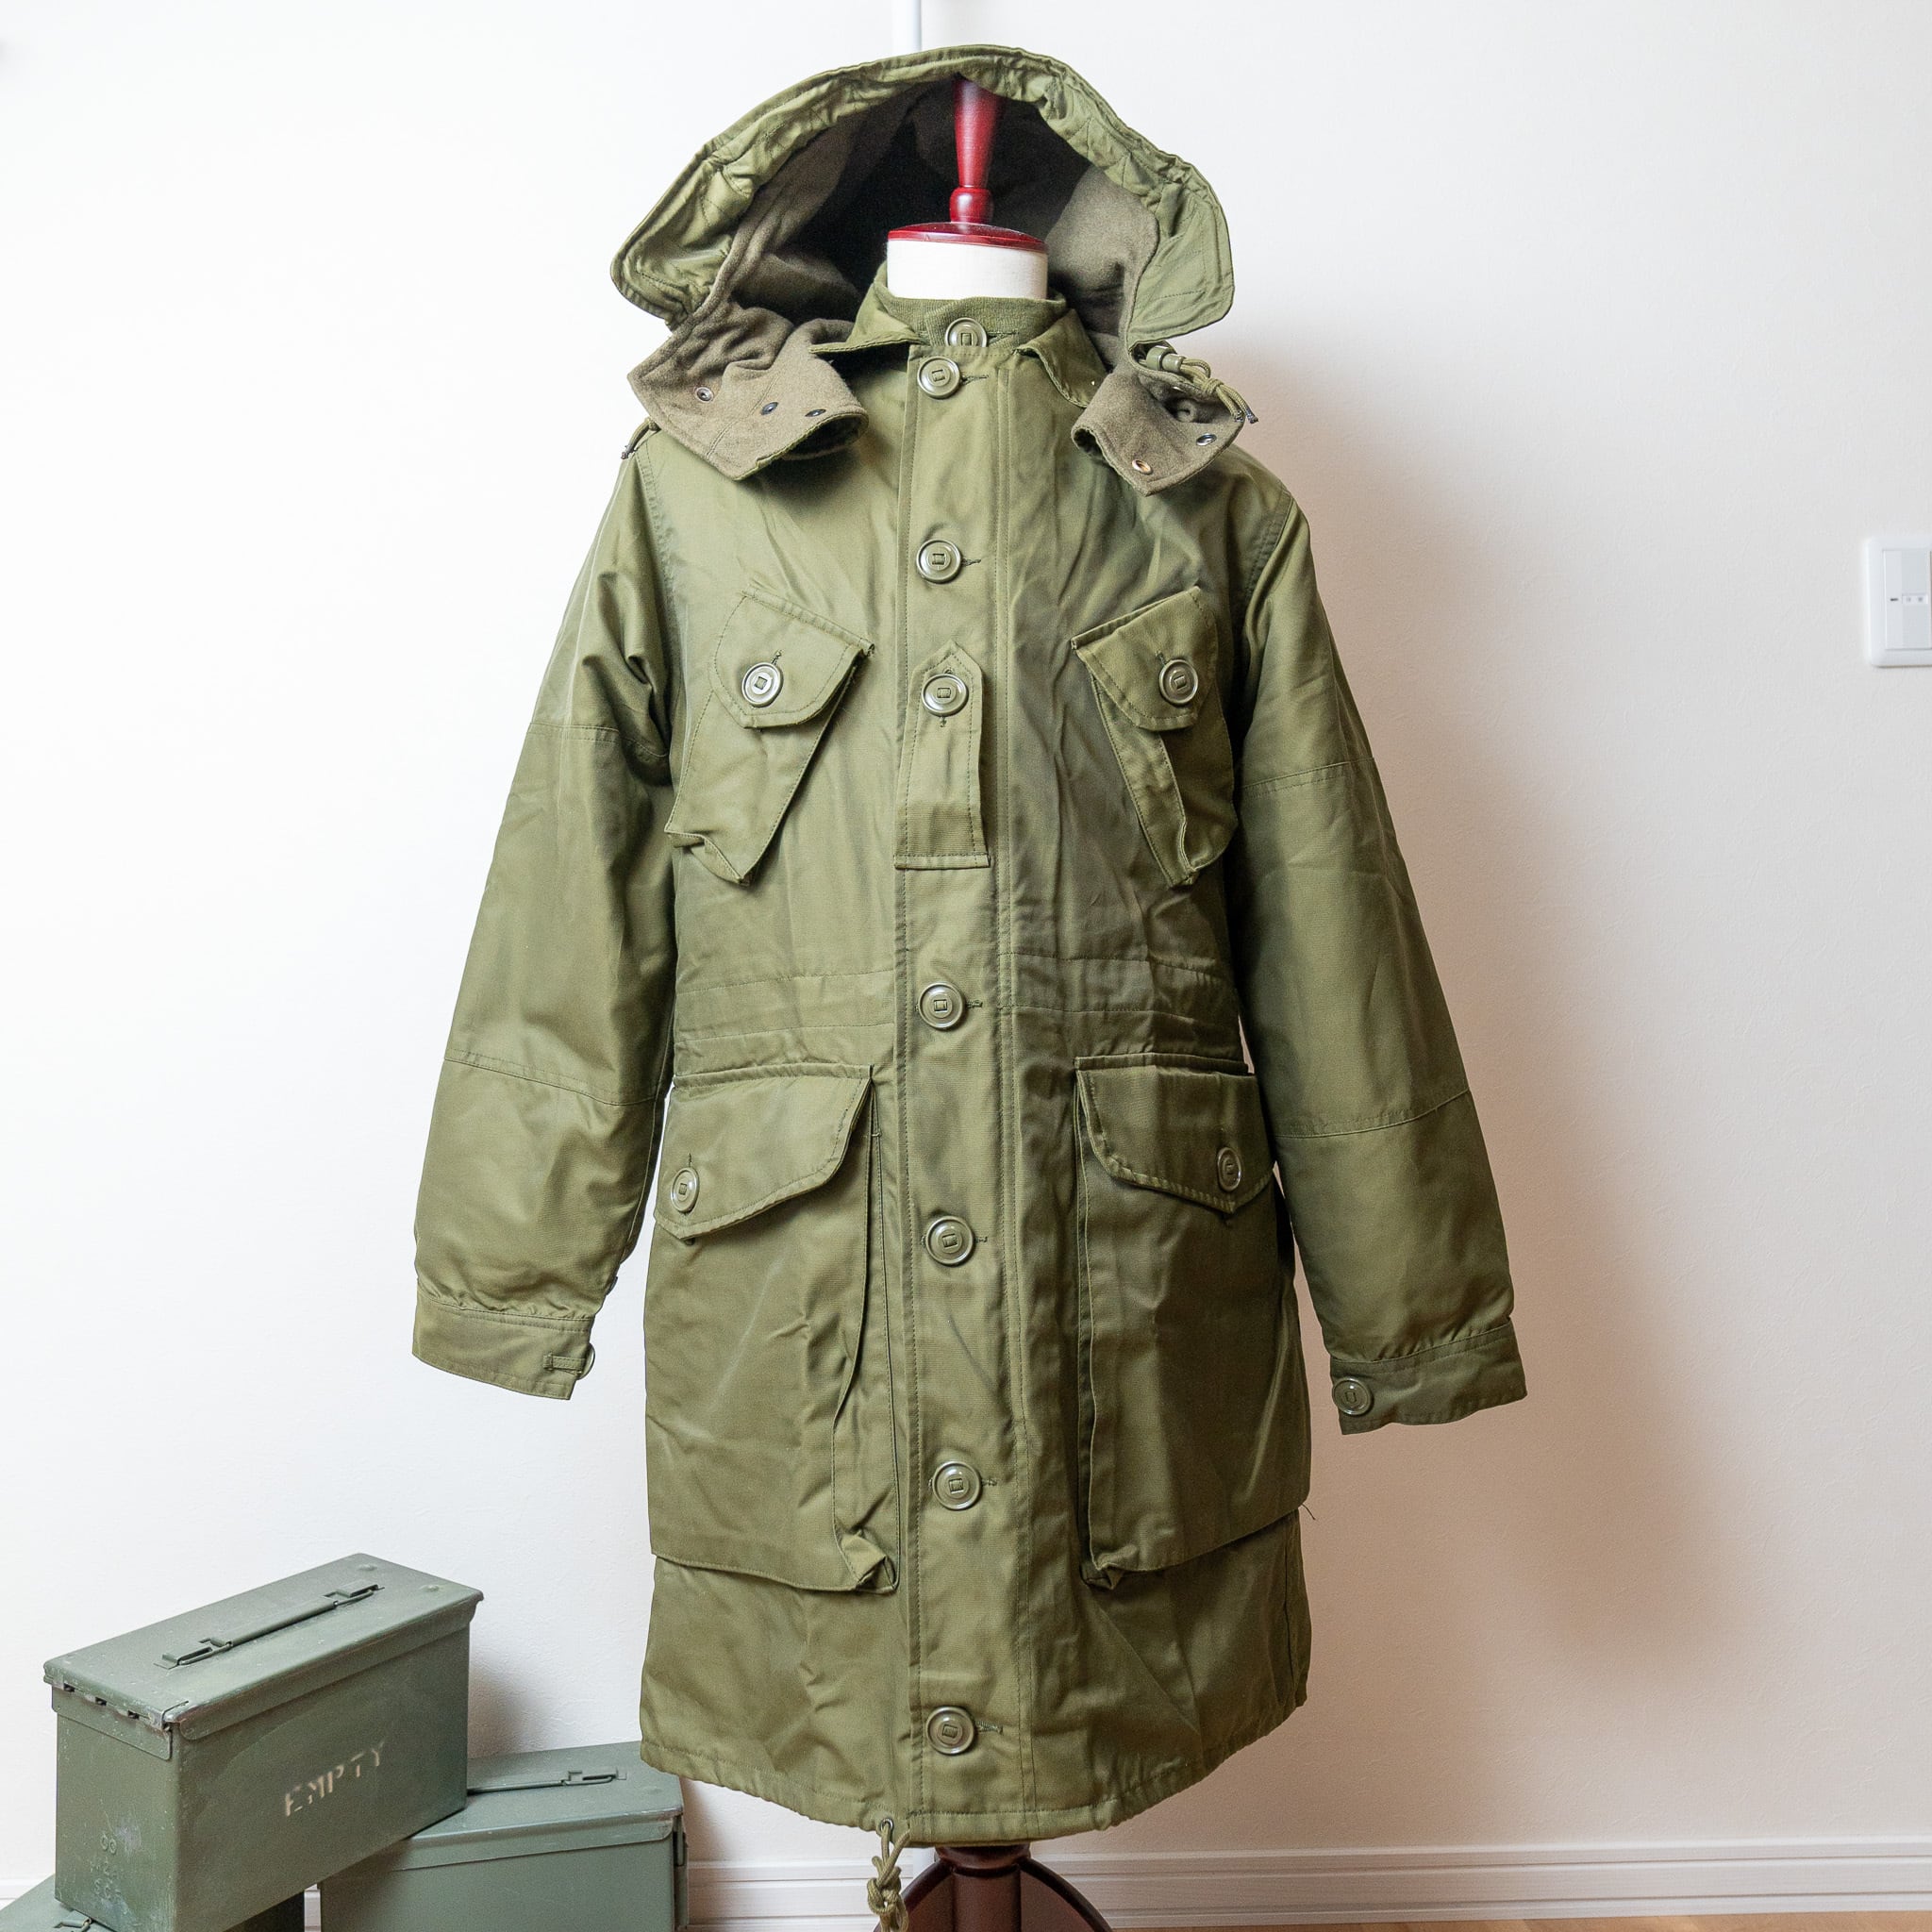 DEADSTOCK】Canadian Army ECW Combat Parka "Full Set" S-L 実物 カナダ軍 コンバット パーカー  希少 レア デッドストック | FAR EAST SIGNAL